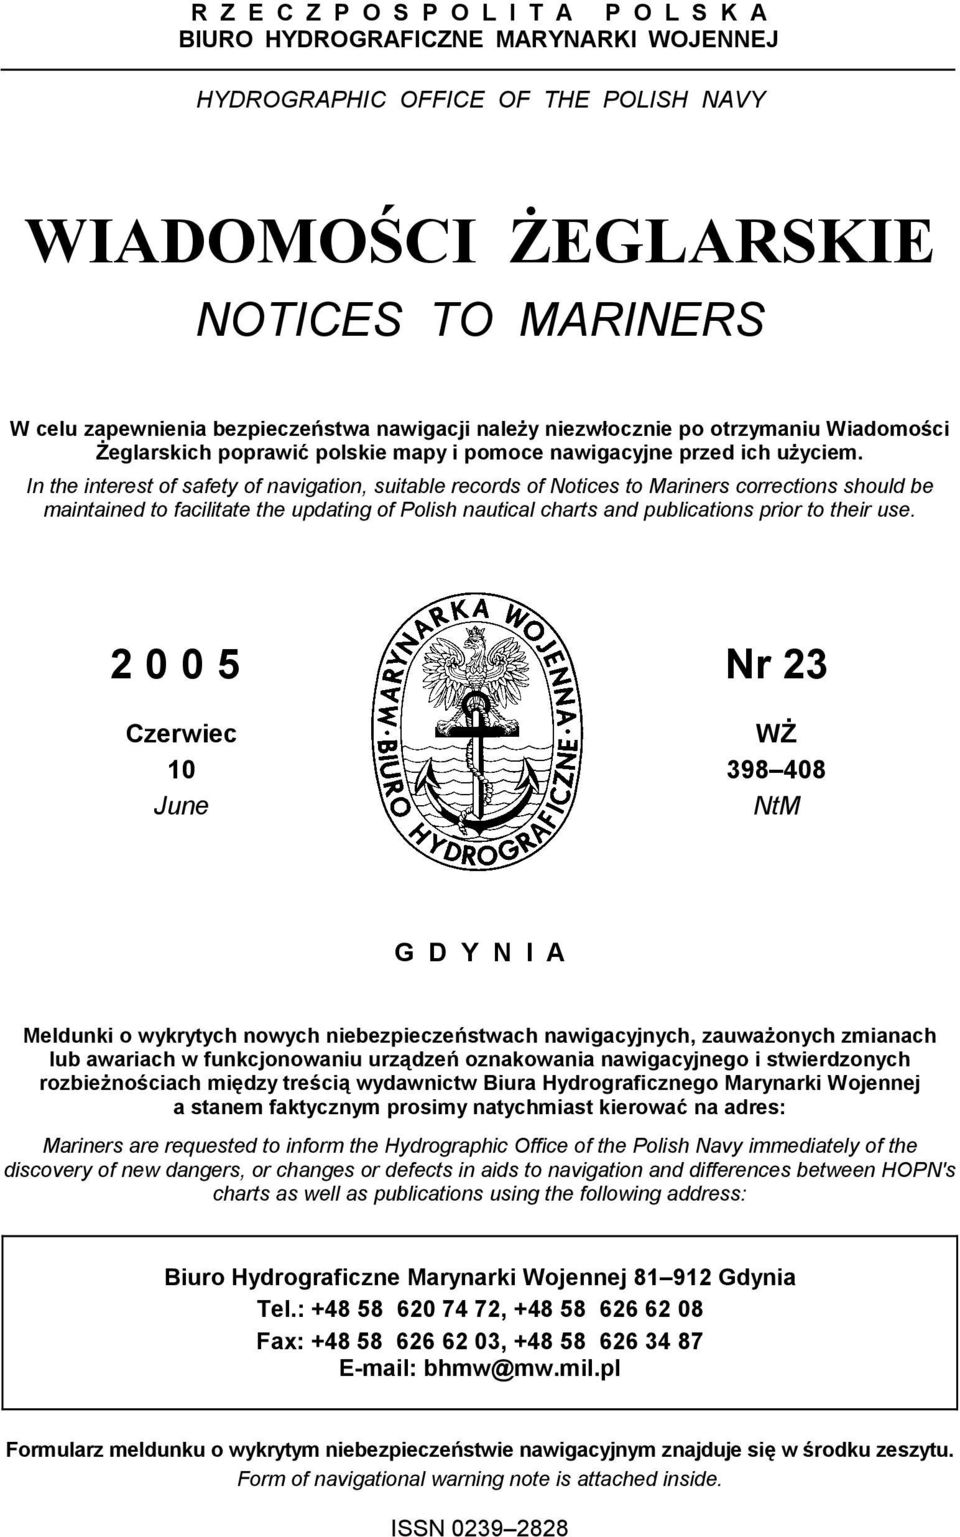 In the interest of safety of navigation, suitable records of Notices to Mariners corrections should be maintained to facilitate the updating of Polish nautical charts and publications prior to their